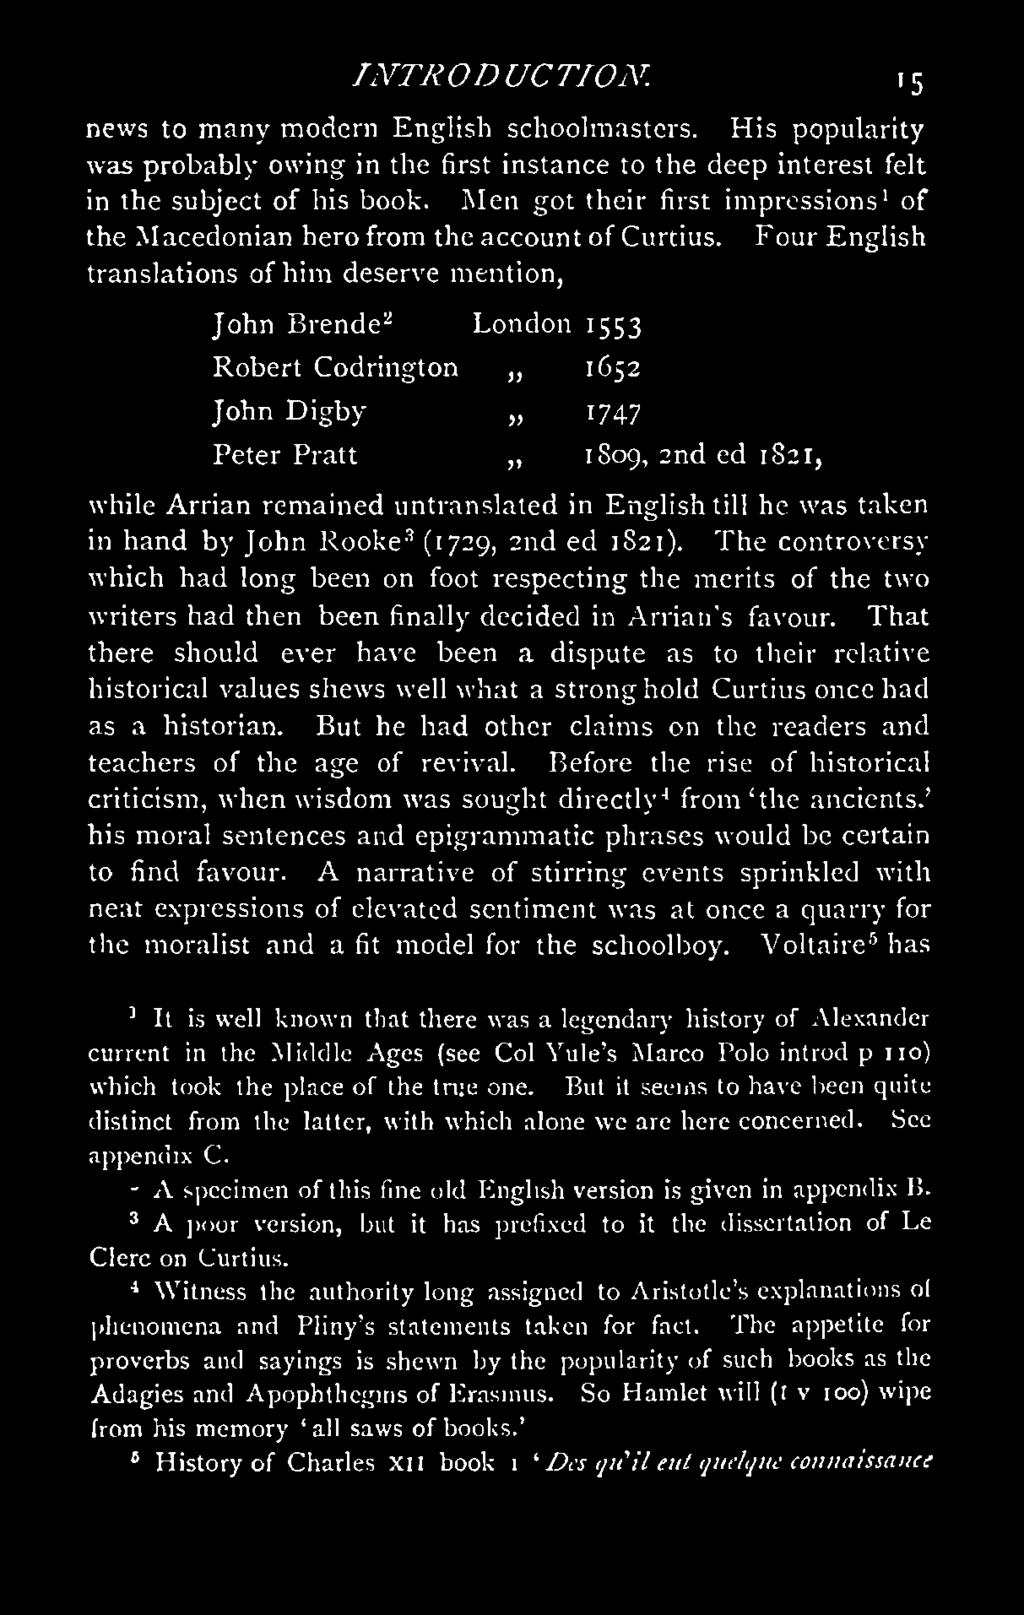 Four English translations of him deserve mention, John Brende2 London 1553 Robert Codrington 1652 John D igby 1747 Peter Pratt 1809, 2nd ed 1821, while Arrian remained untranslated in English till he